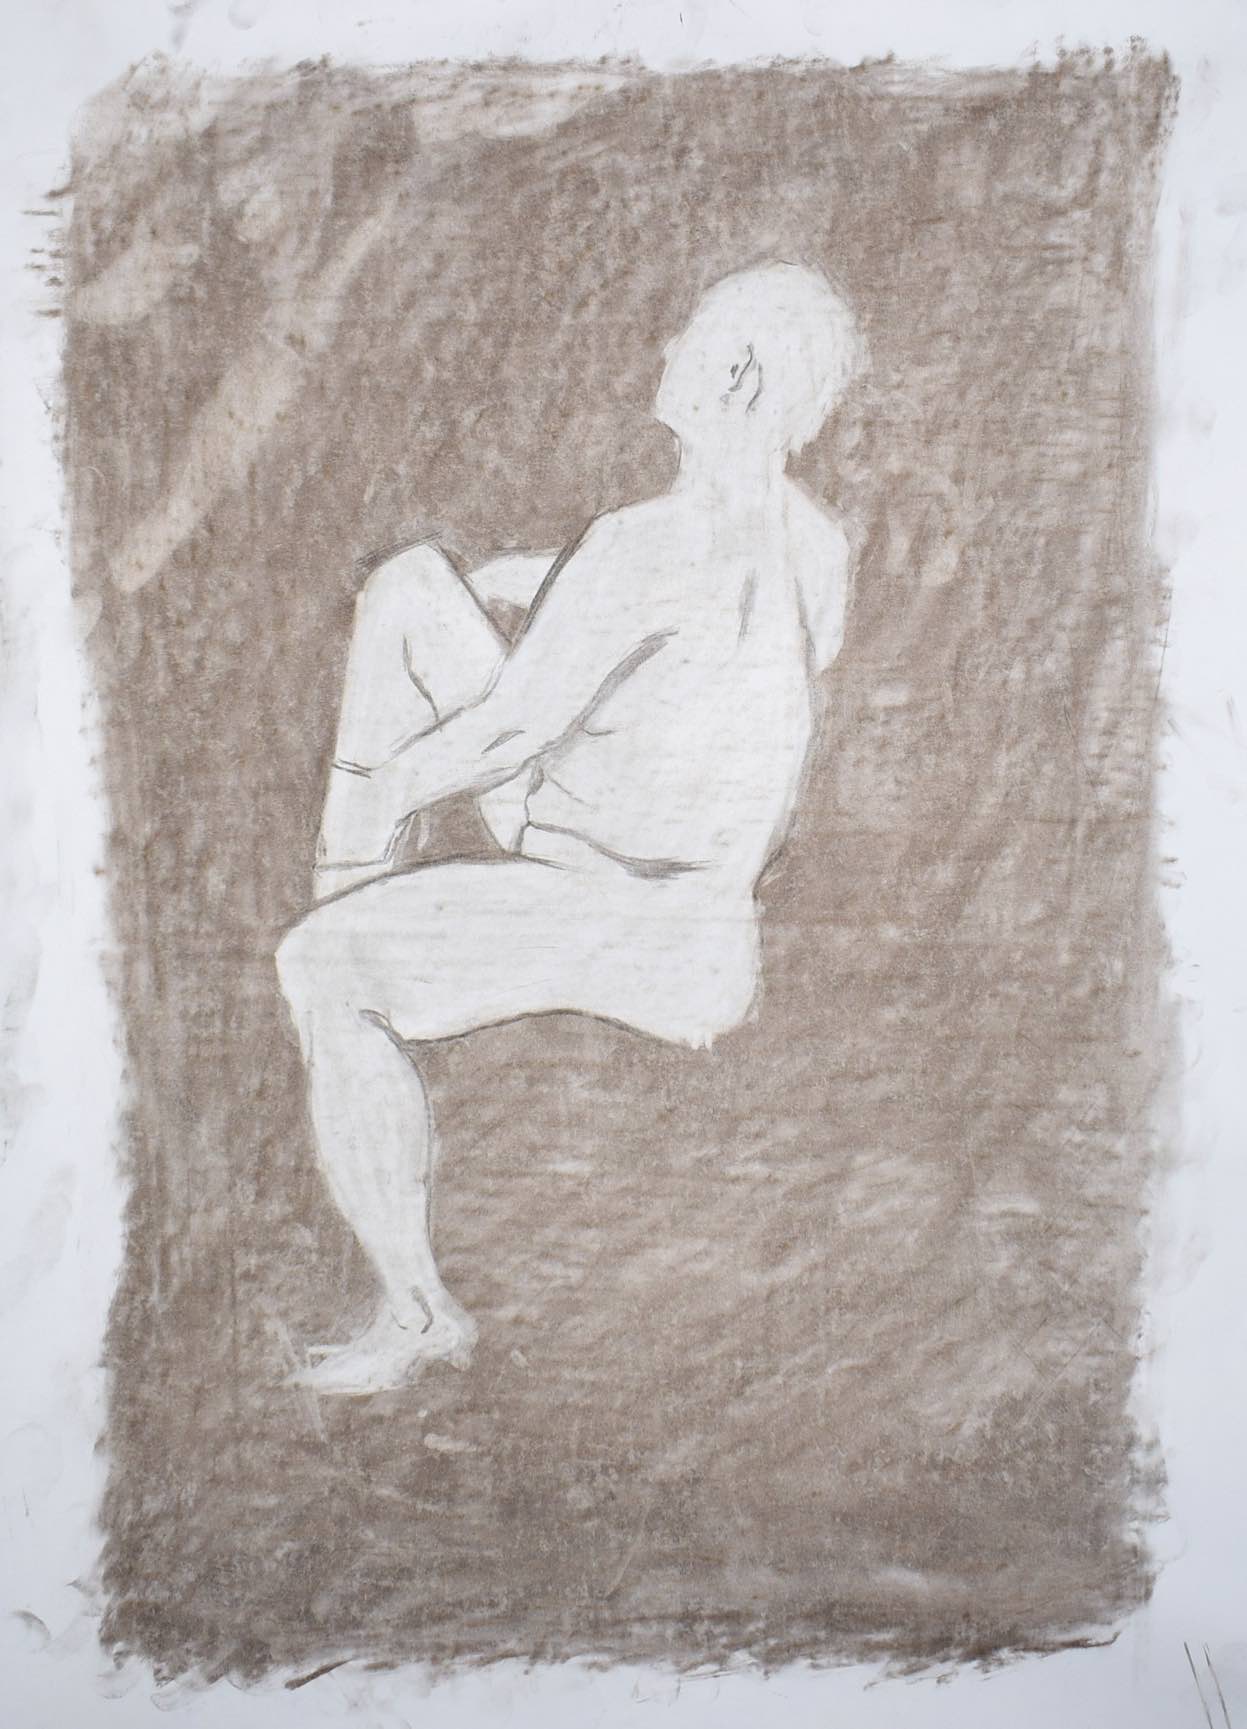 Drawing of seated human figure seen from behind